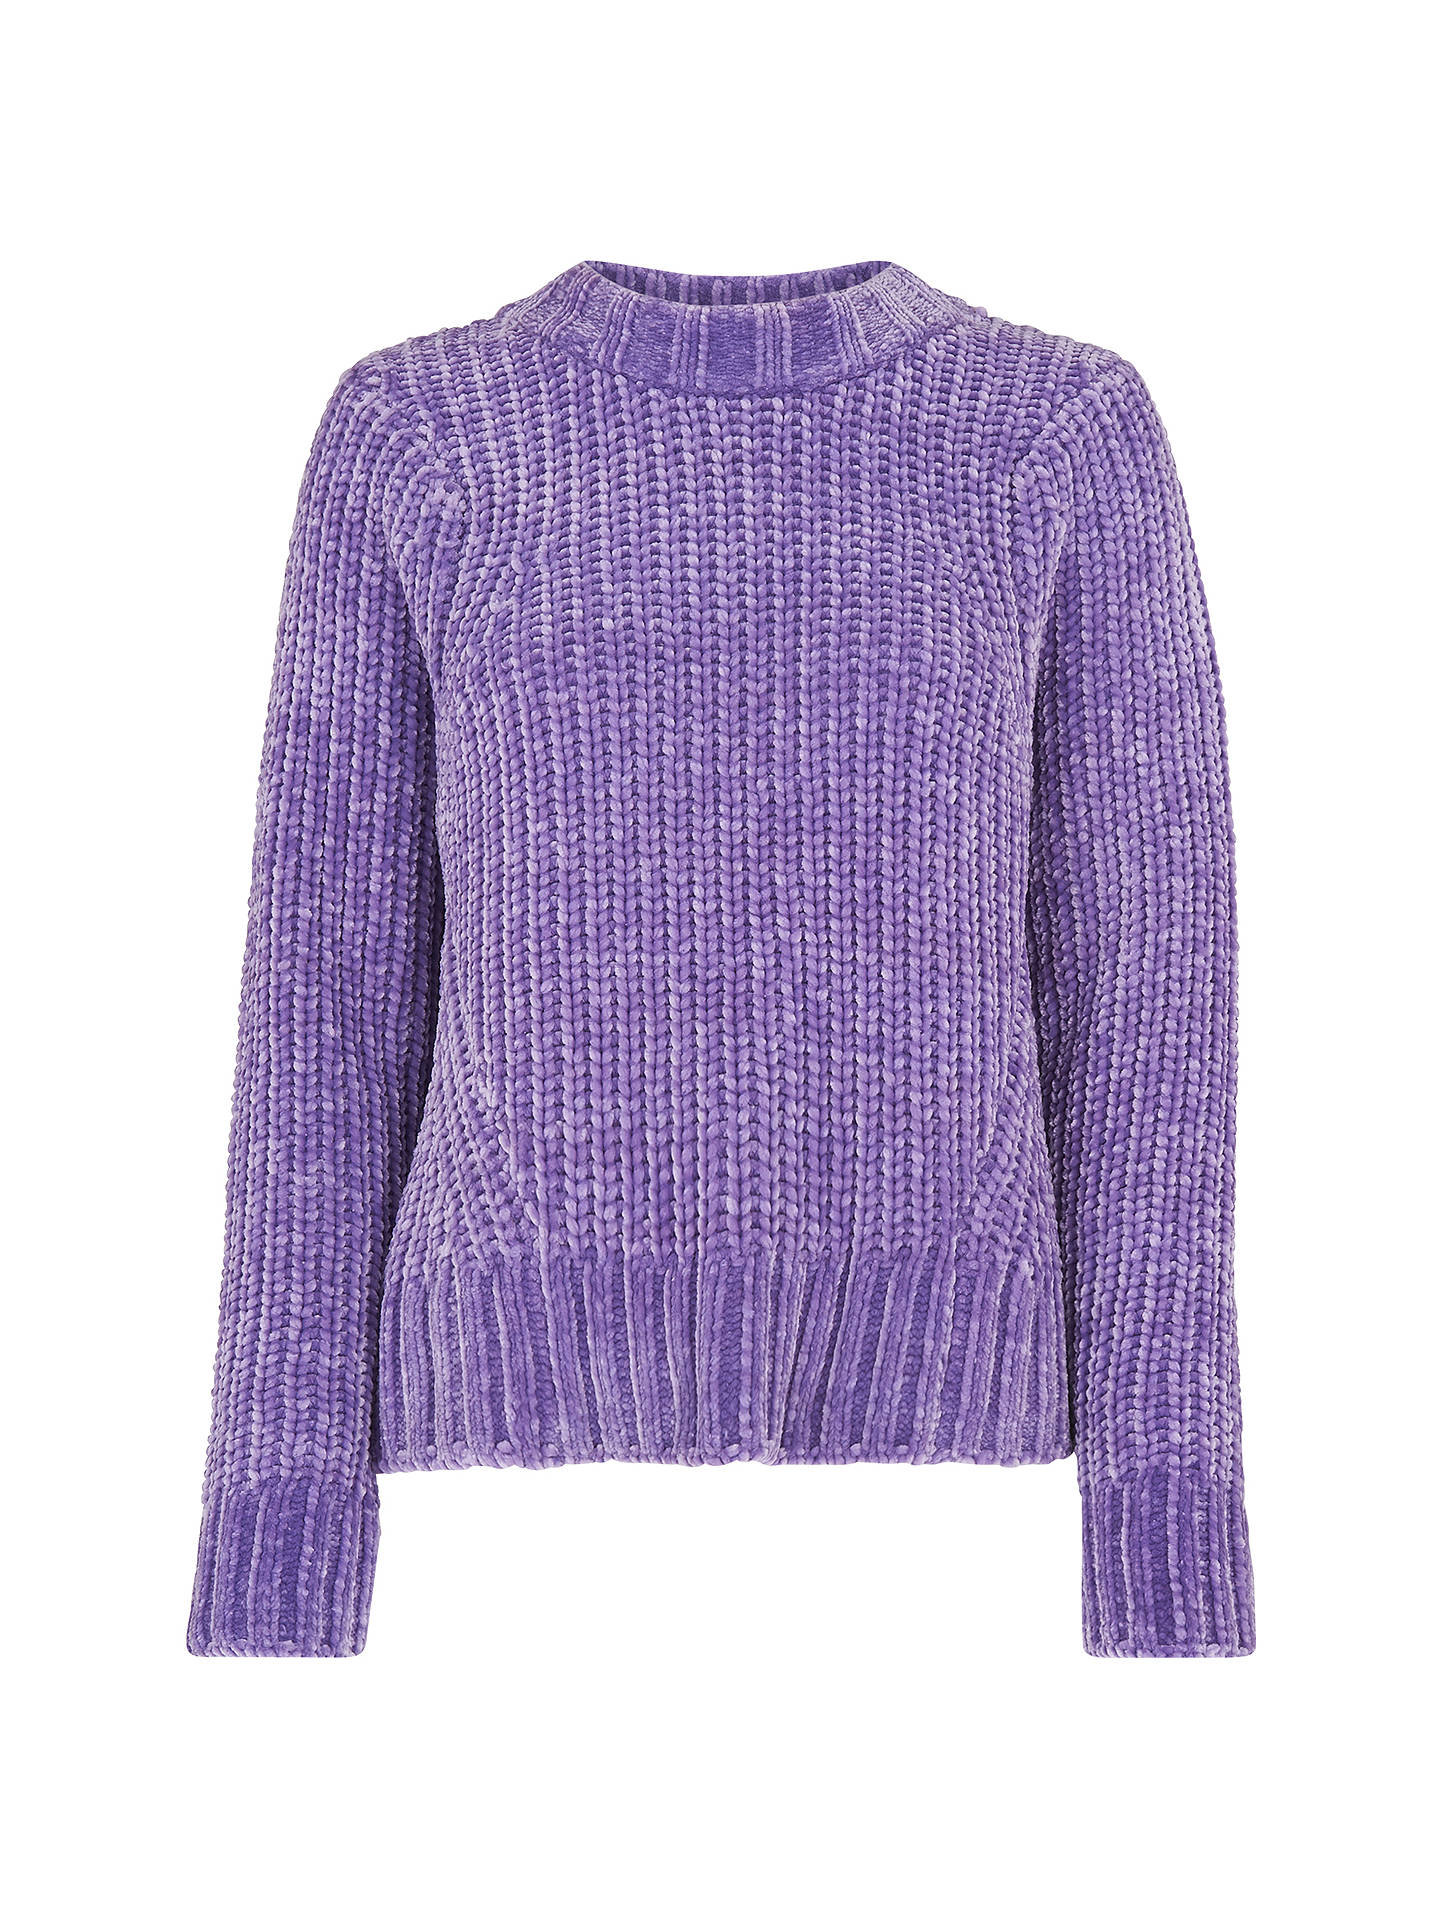 Whistles Cropped Chenille Sweater, Lilac at John Lewis & Partners